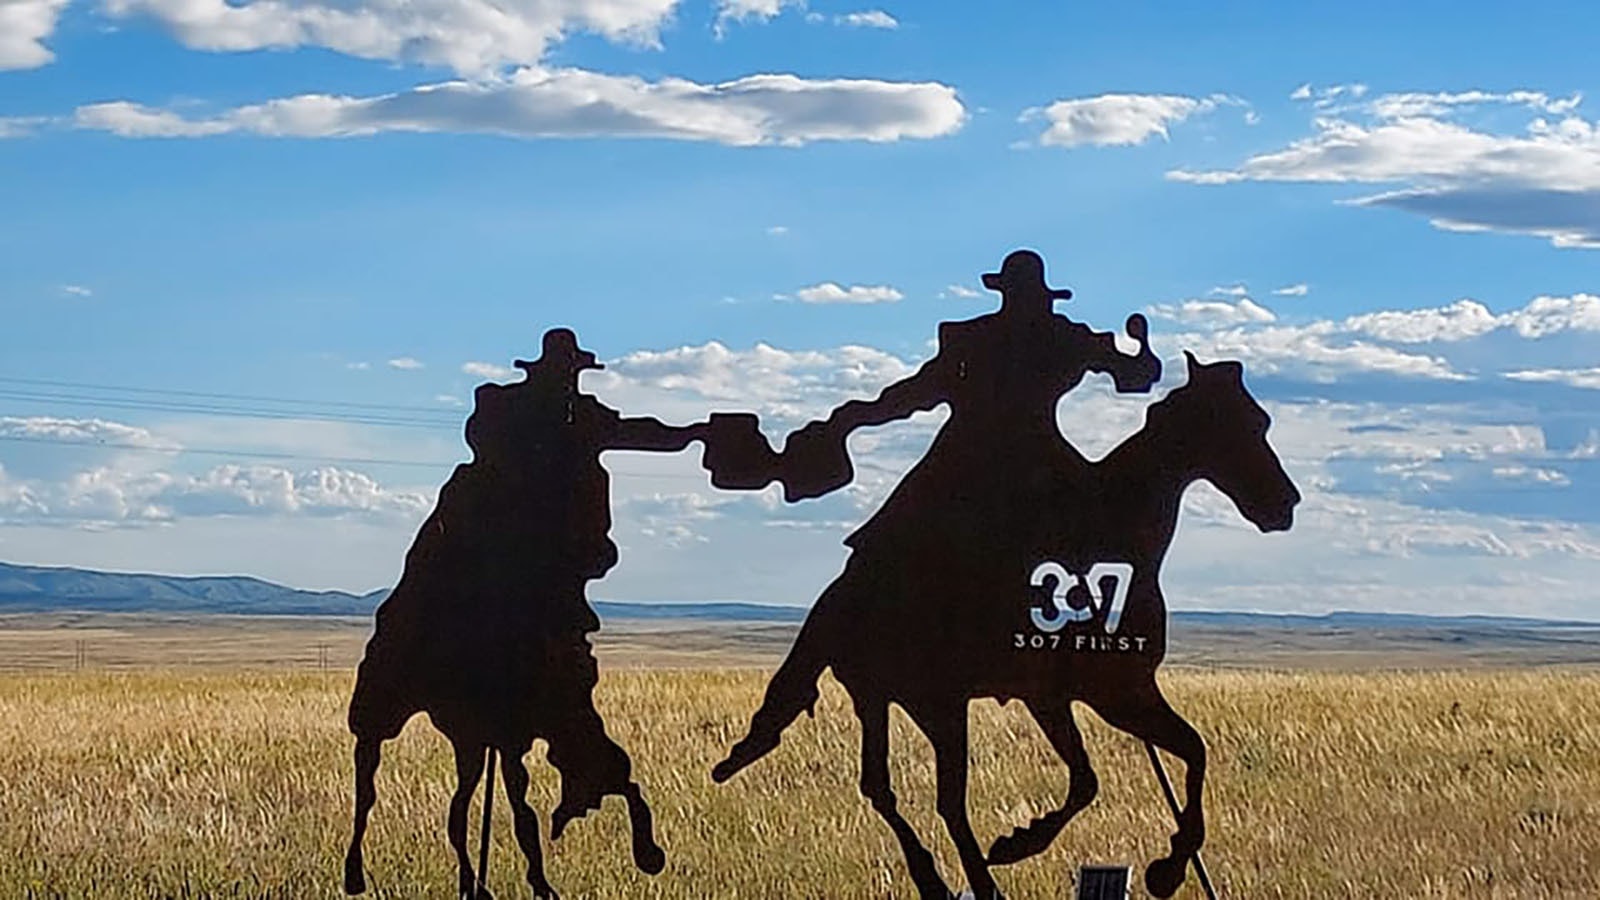 A 307 First steel silhouette of a Pony Express rider installed between Casper and Shoshoni.